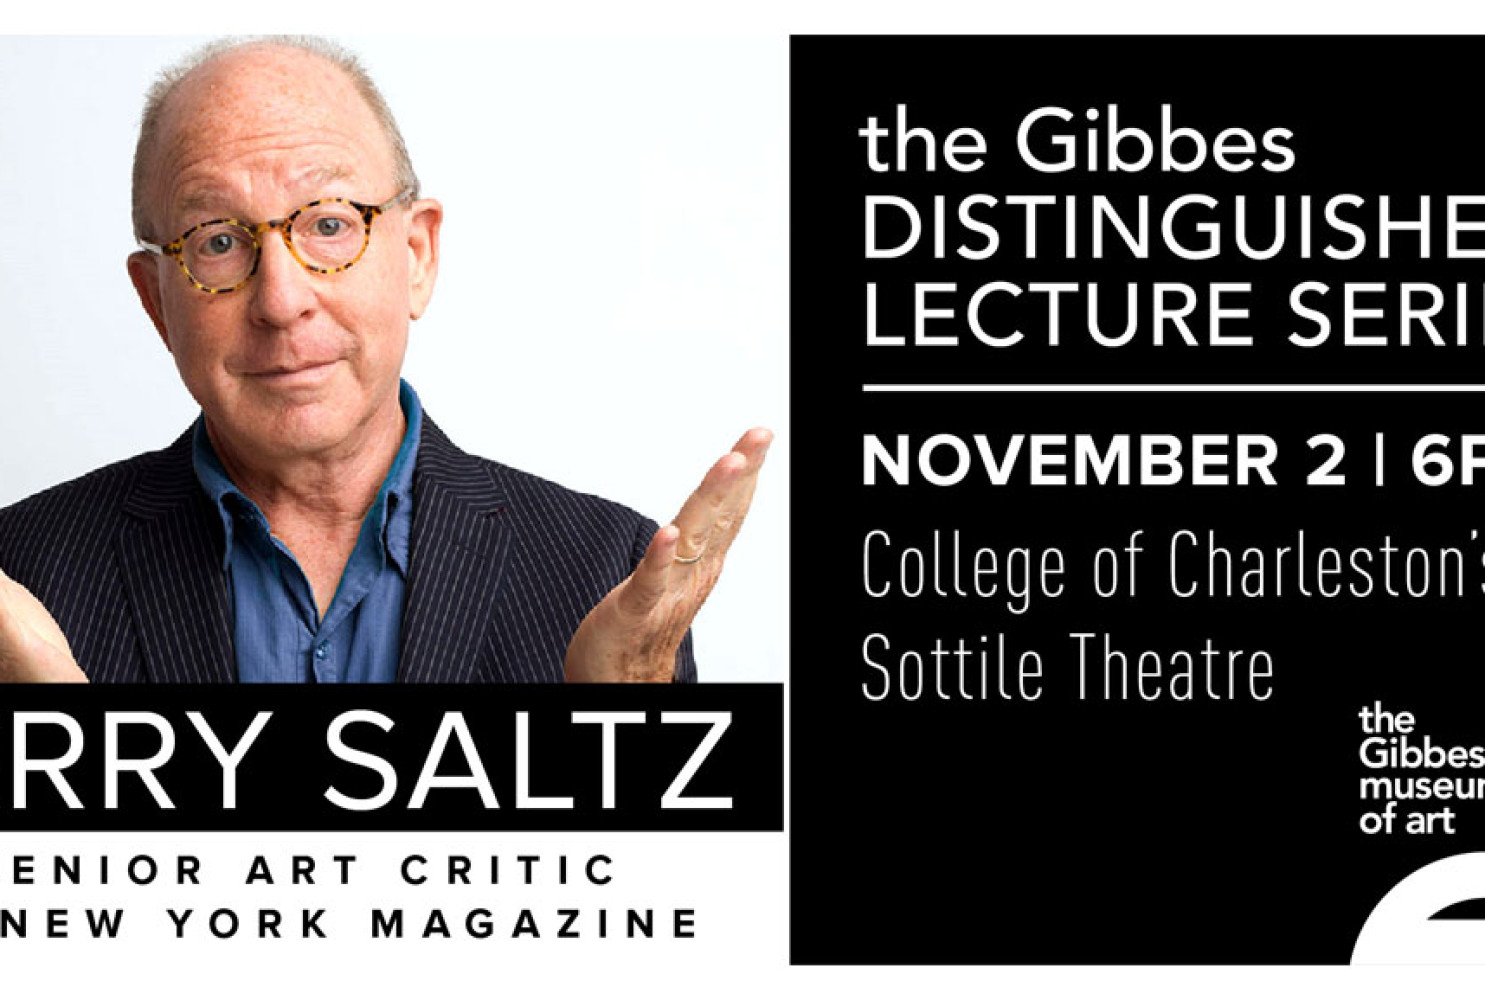 The Gibbes Museum of Art's Distinguished Lecture Series Presents